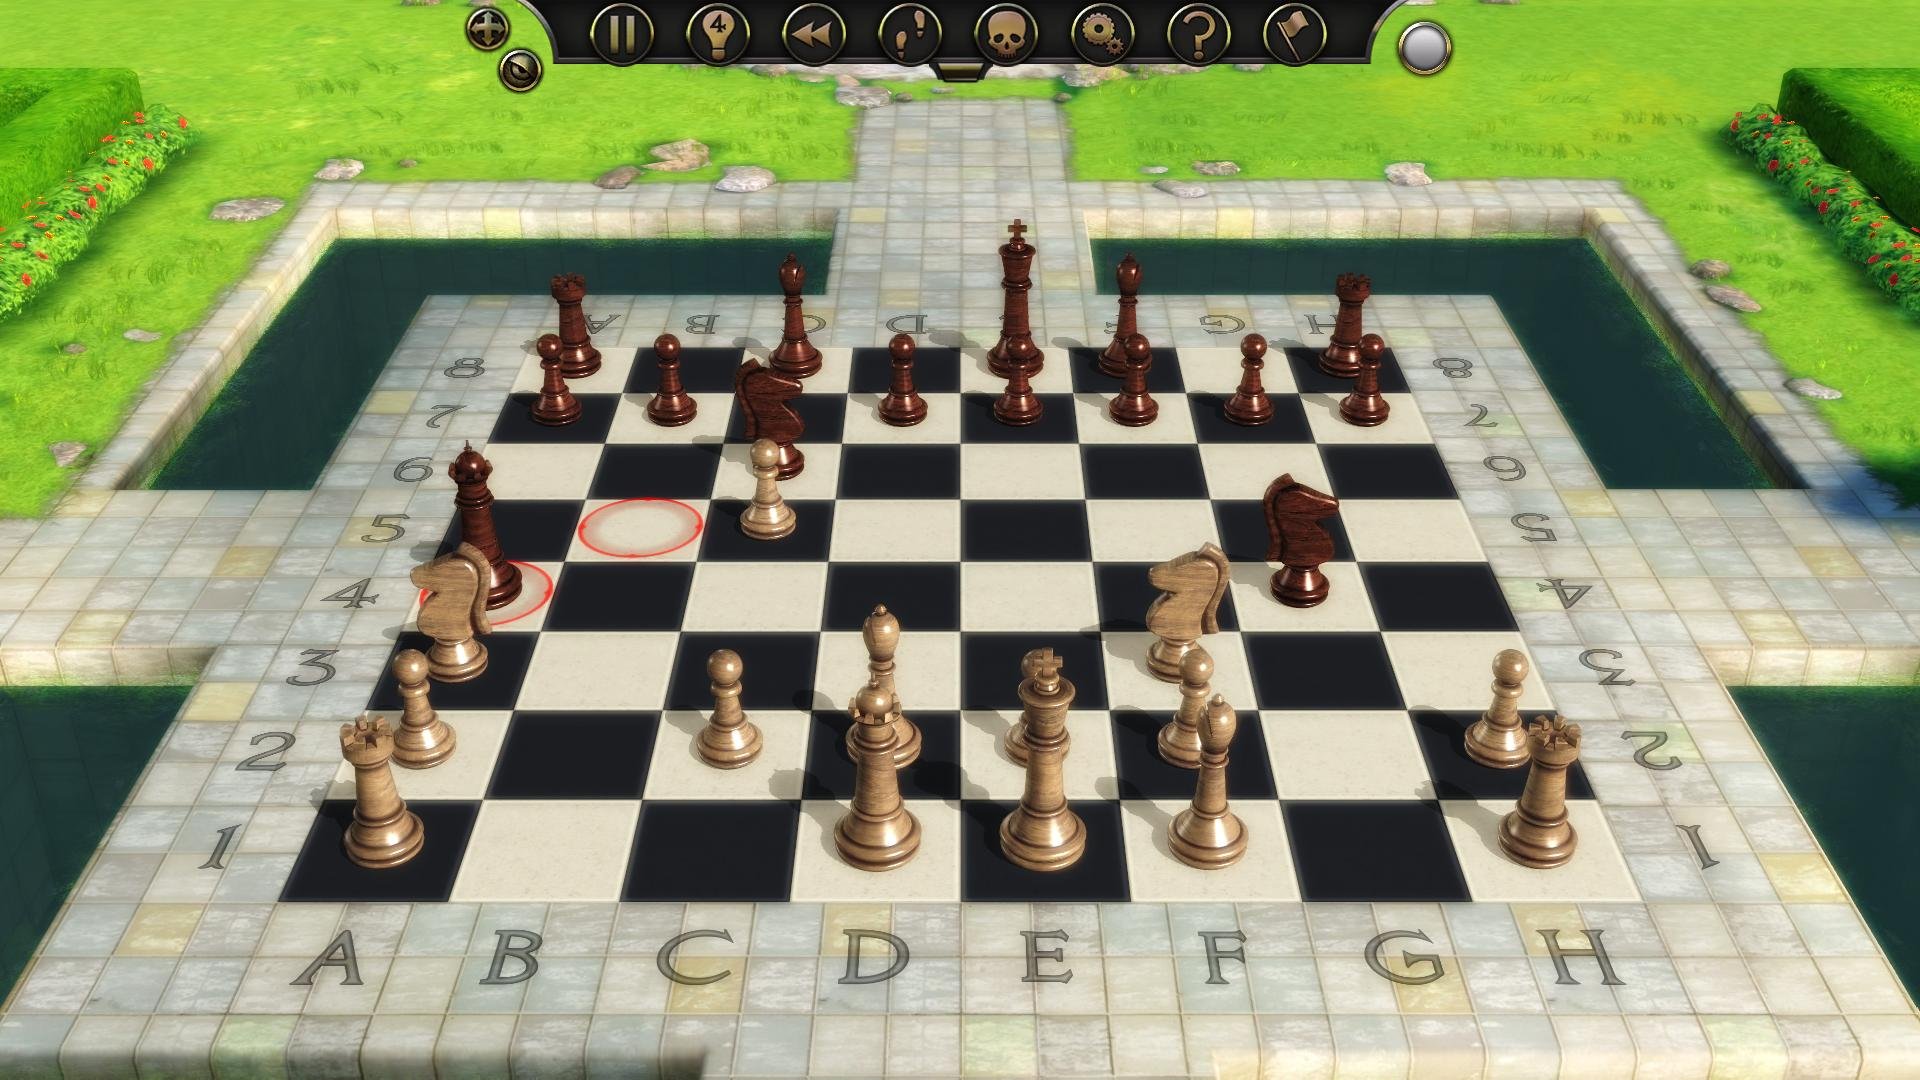 Chess is a game. Battle Chess игра. Battle Chess game of Kings. Battle Chess 1 игра.